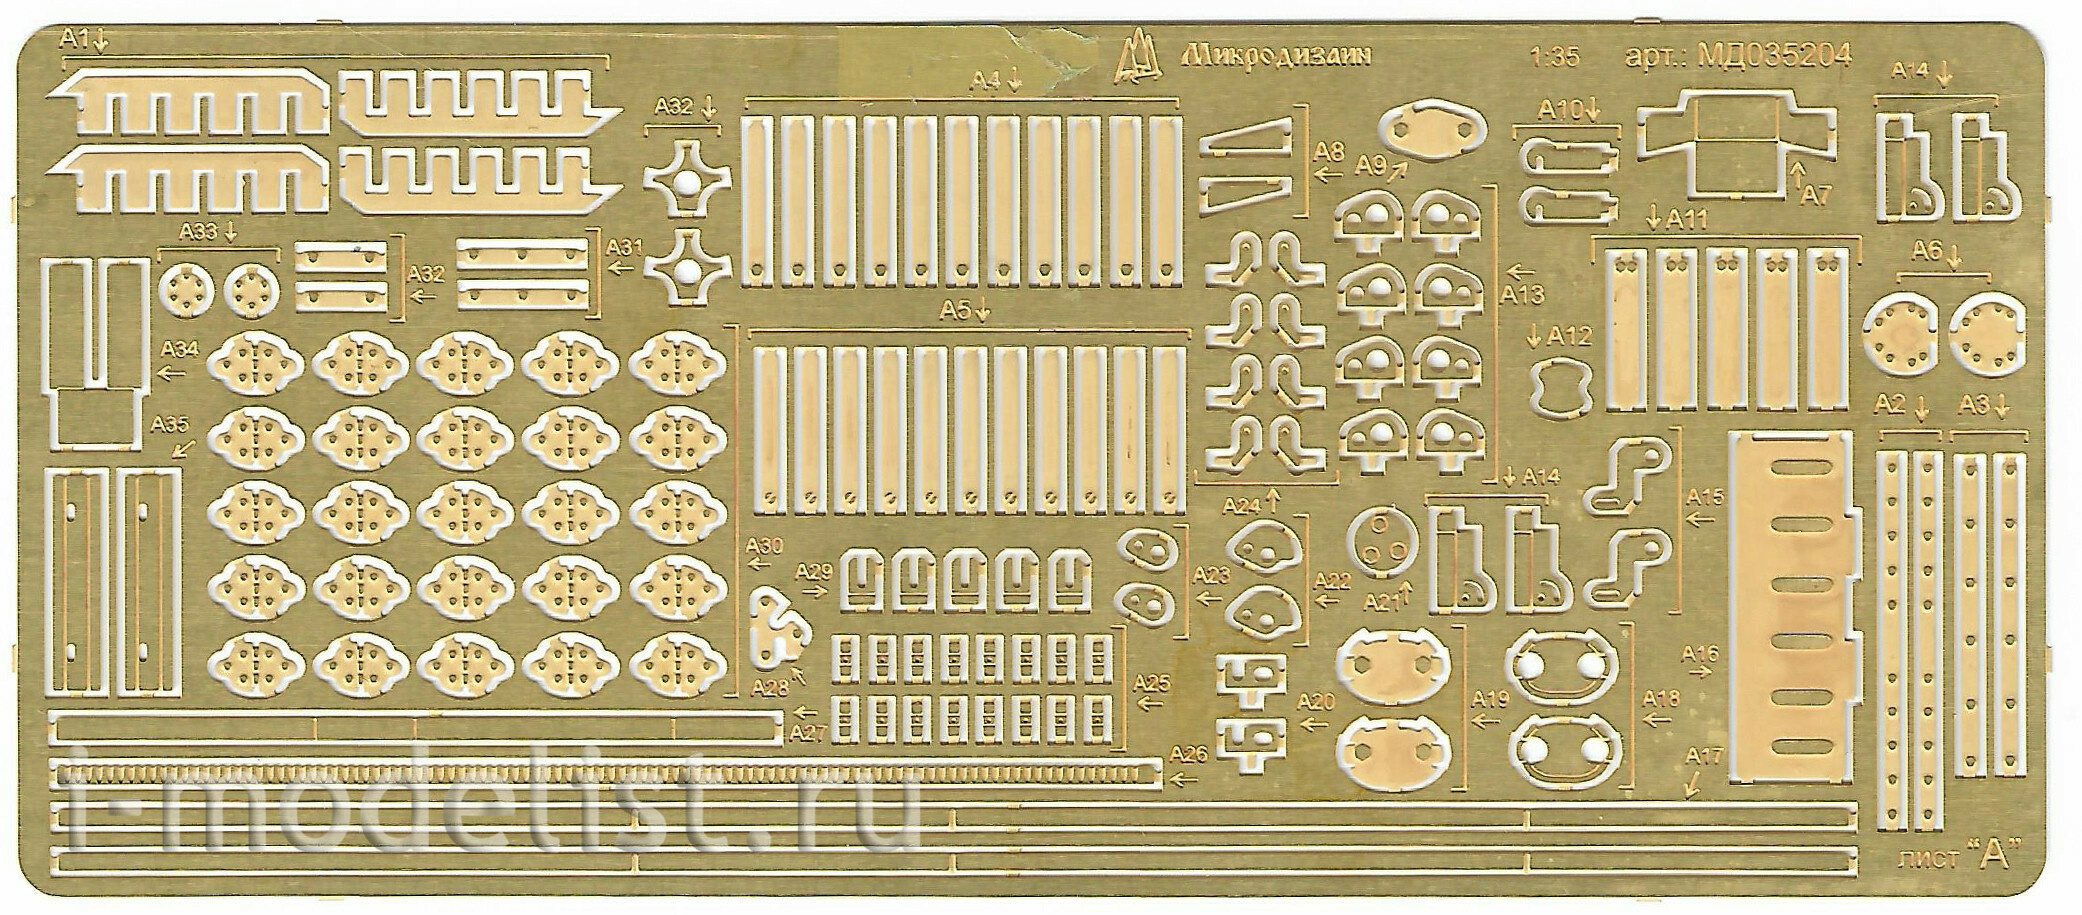 035204 Microdesign 1/35 Kit of photo-etched parts for tank 90 (Base set)